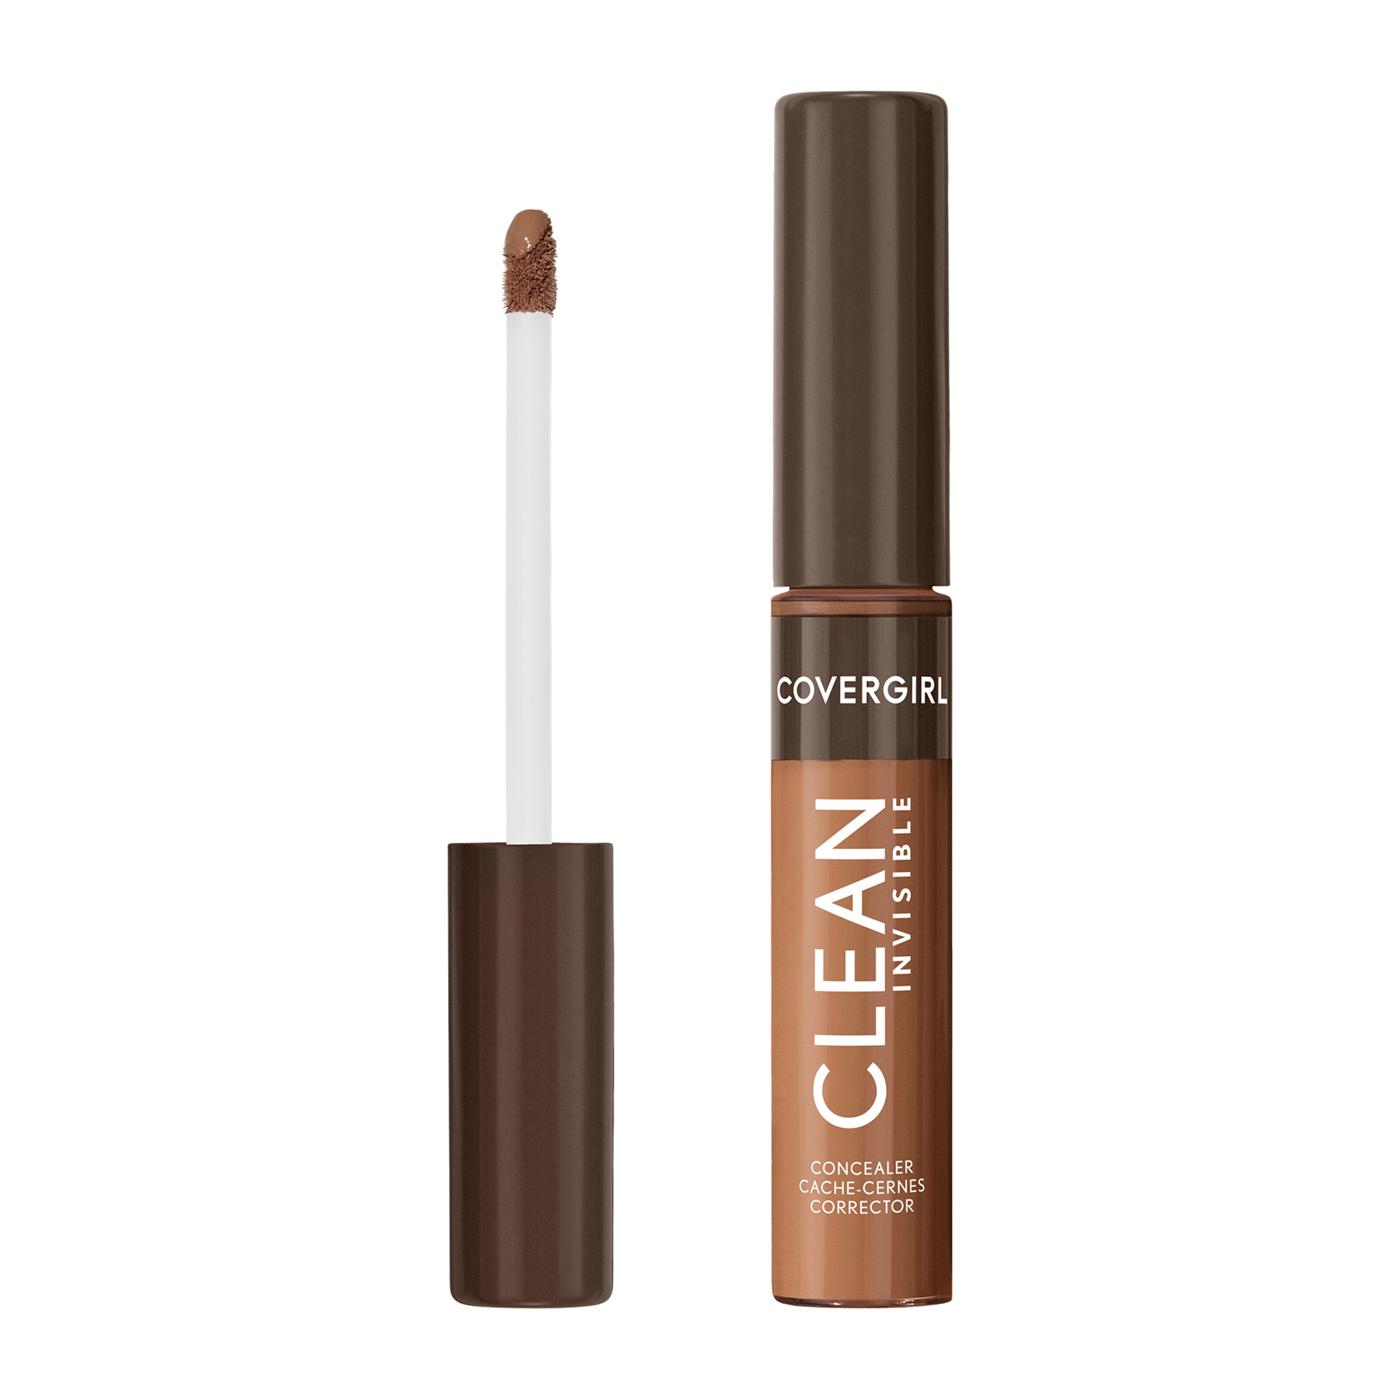 Covergirl Clean Invisible Concealer - Bronze; image 7 of 15